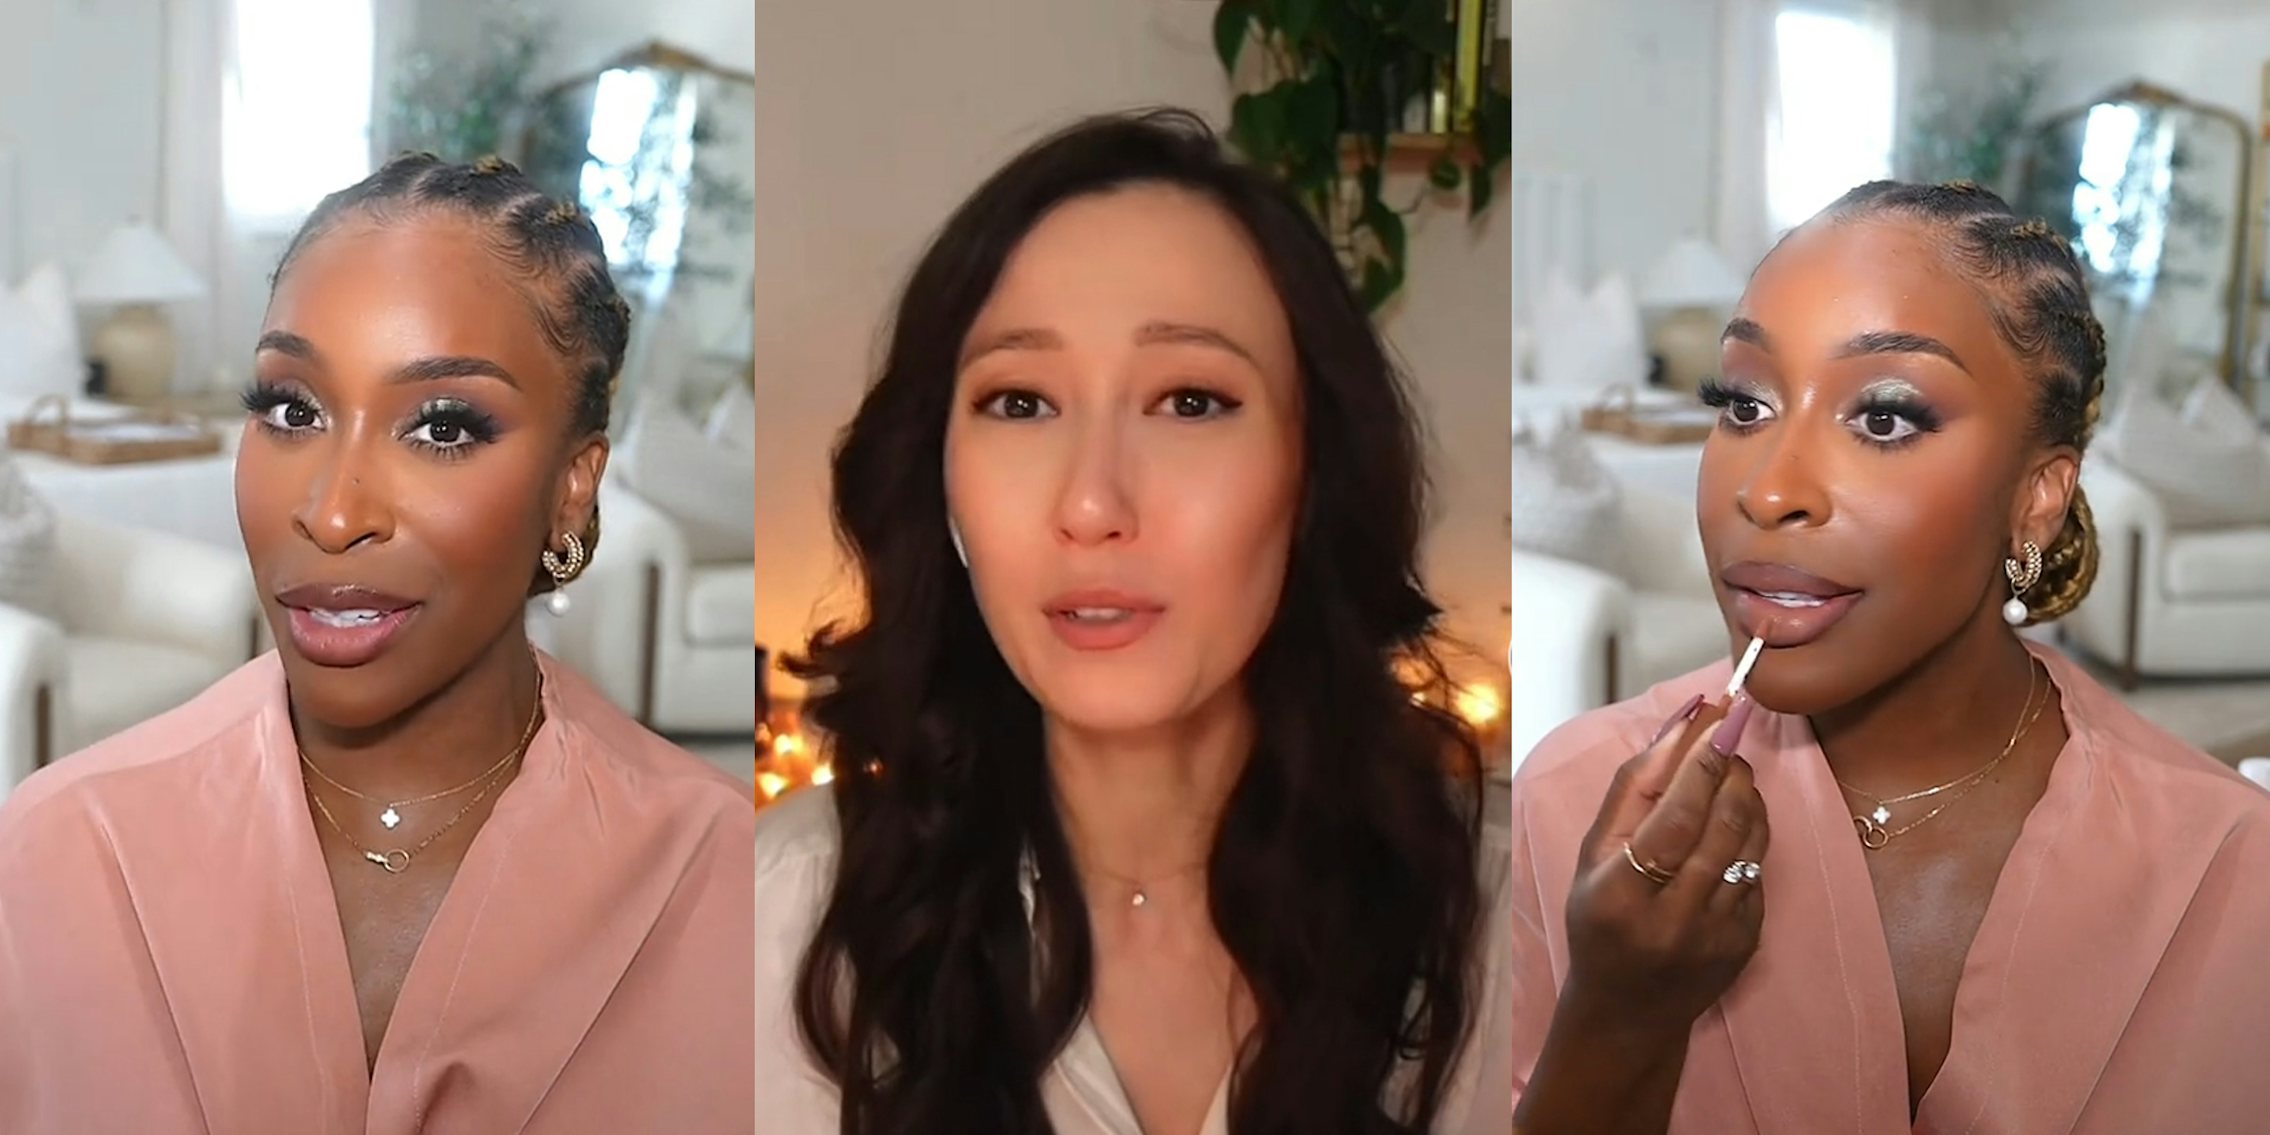 Black beauty influencer calls out video that says 'elegant ladies' don't use dark lip liner